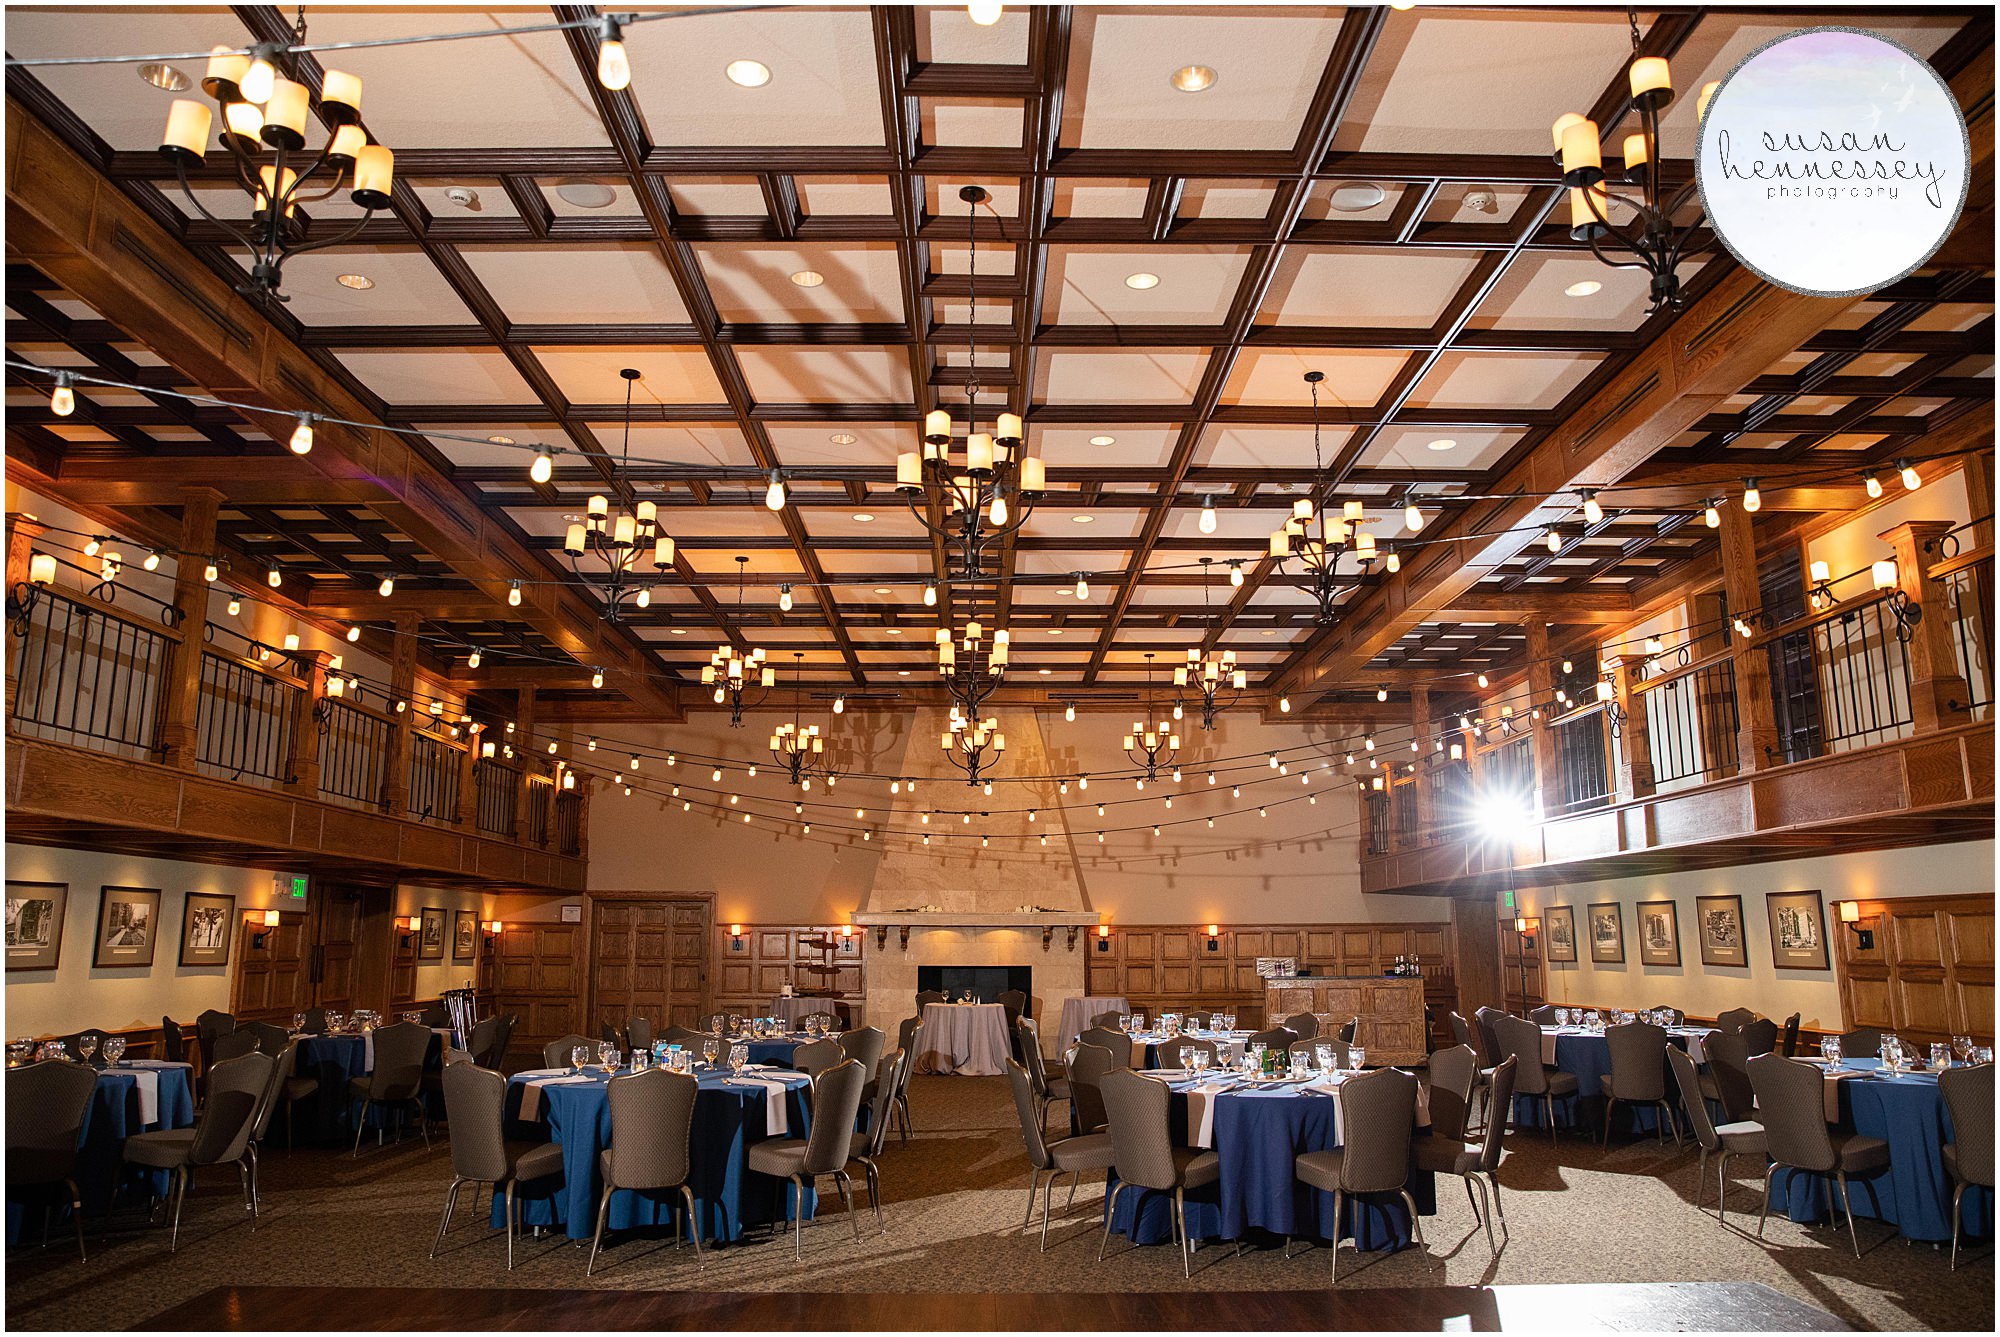 The ballroom at the Moorestown Community House